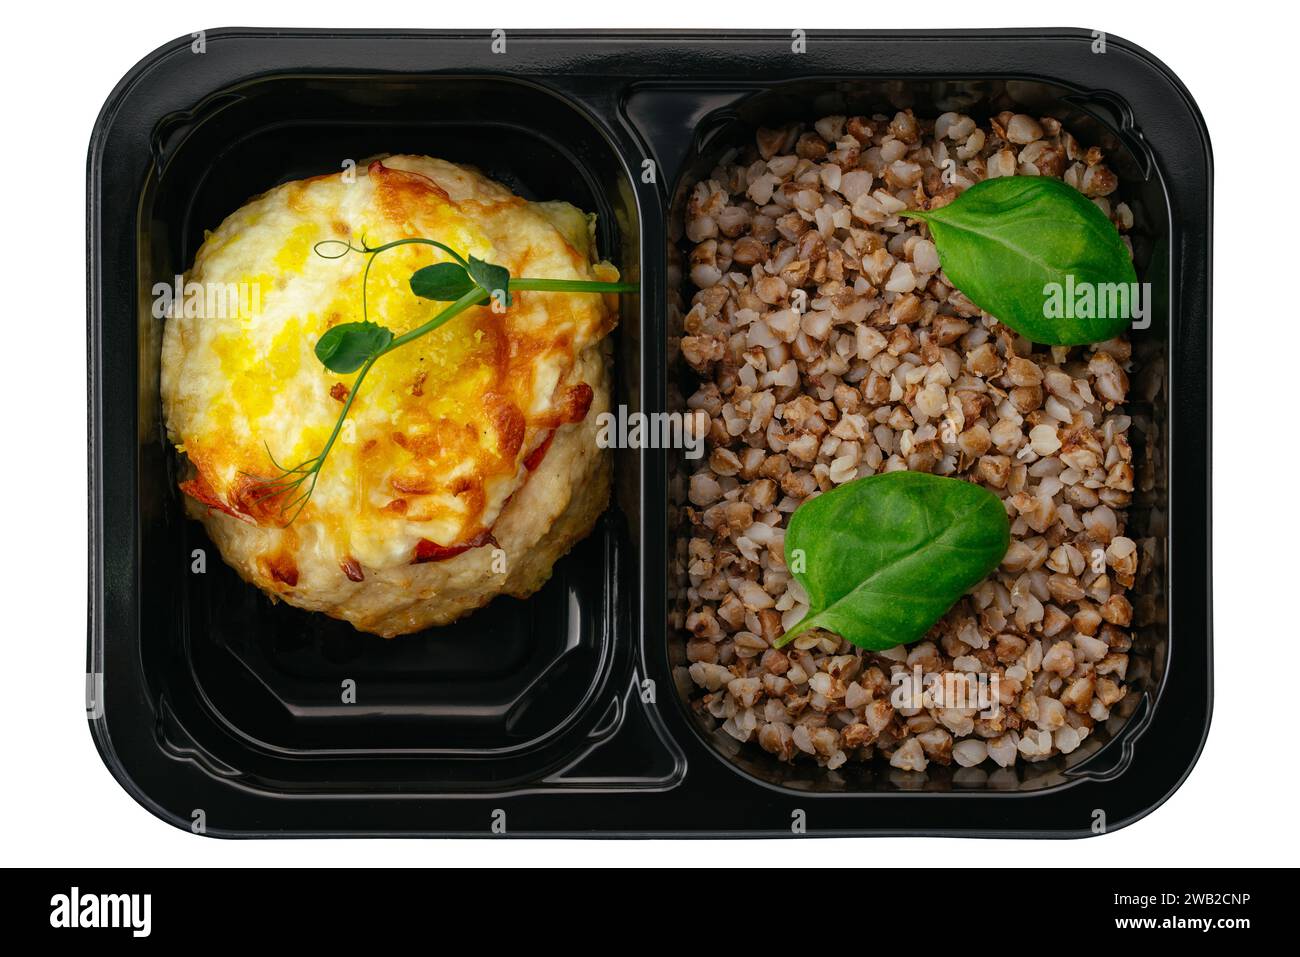 buckwheat with baked fish in lunch box on white background Stock Photo